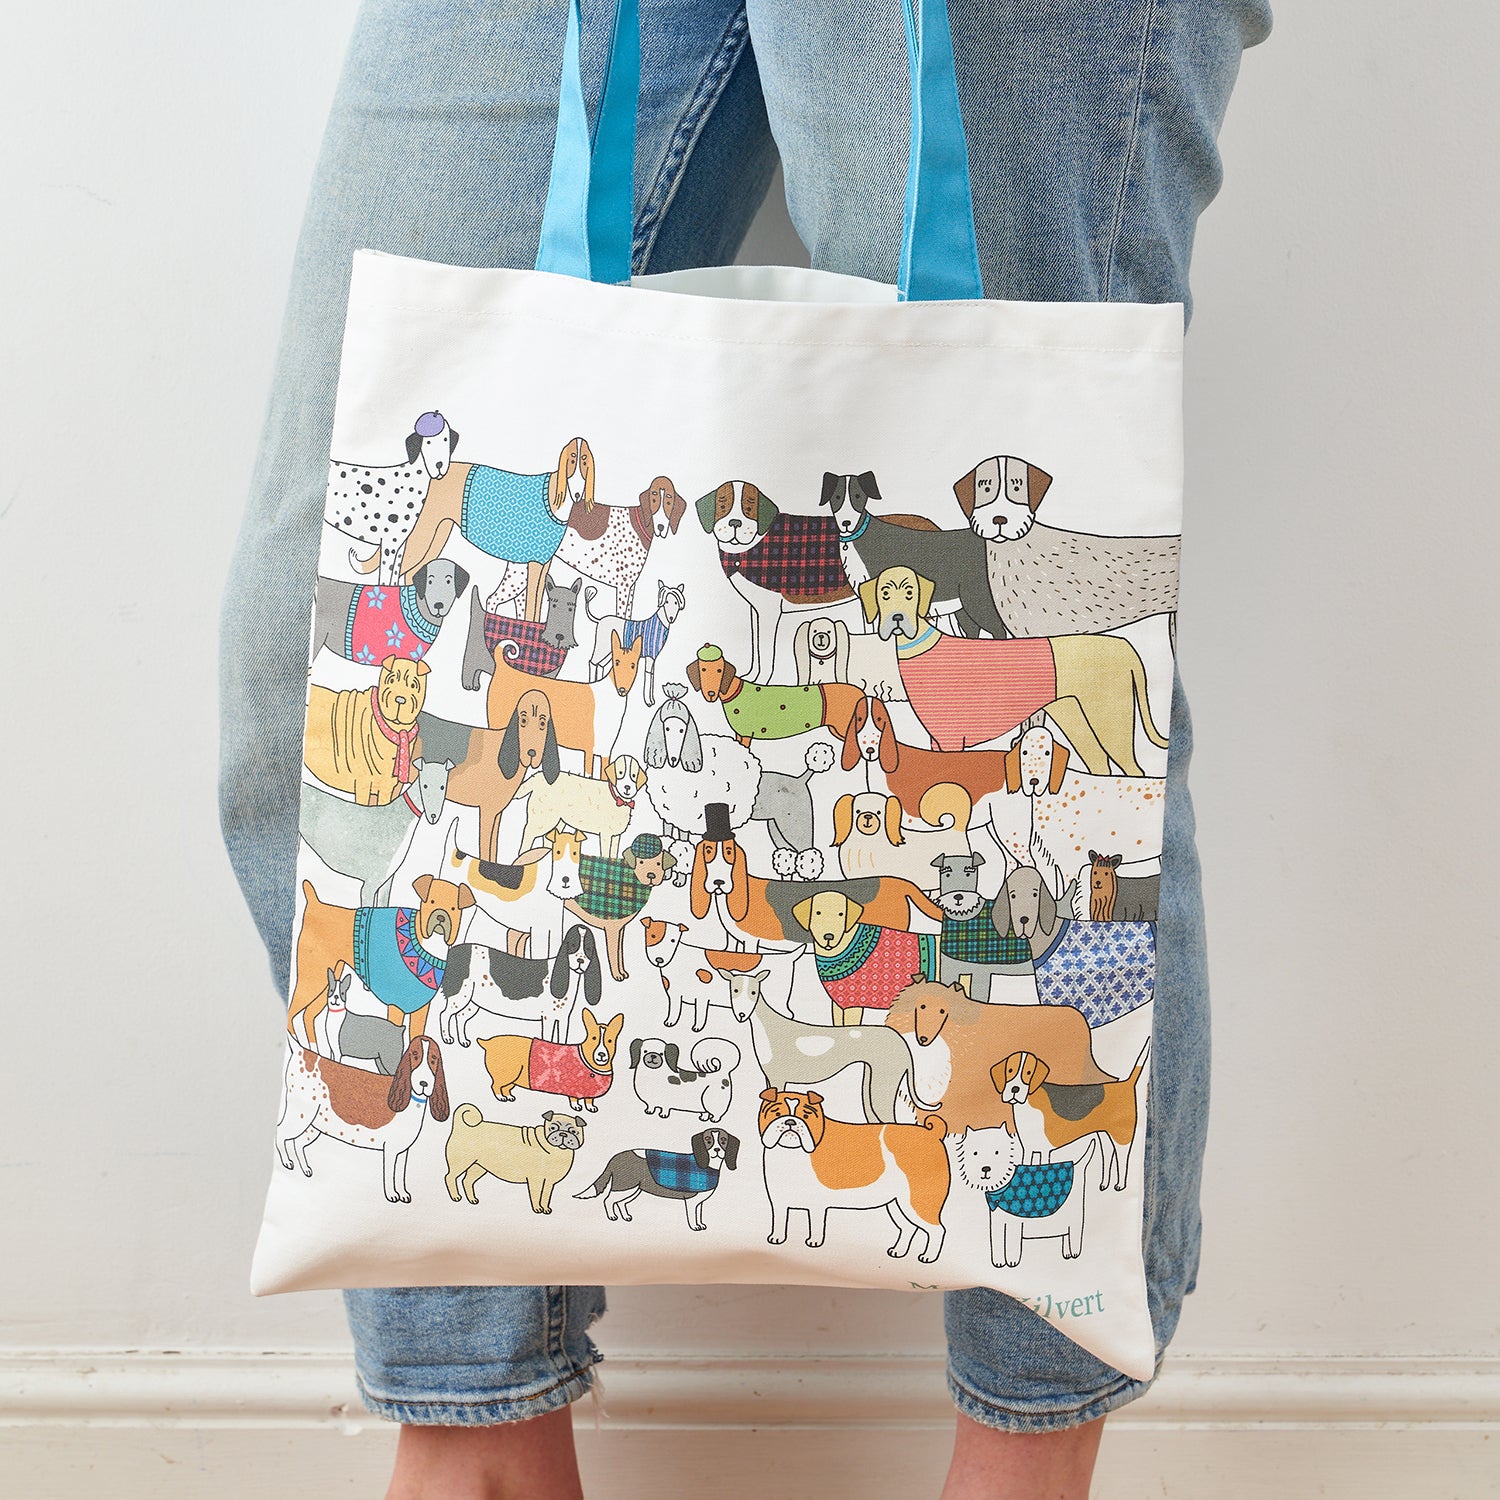 Pack of Proud Pooches Bag by Mary Kilvert